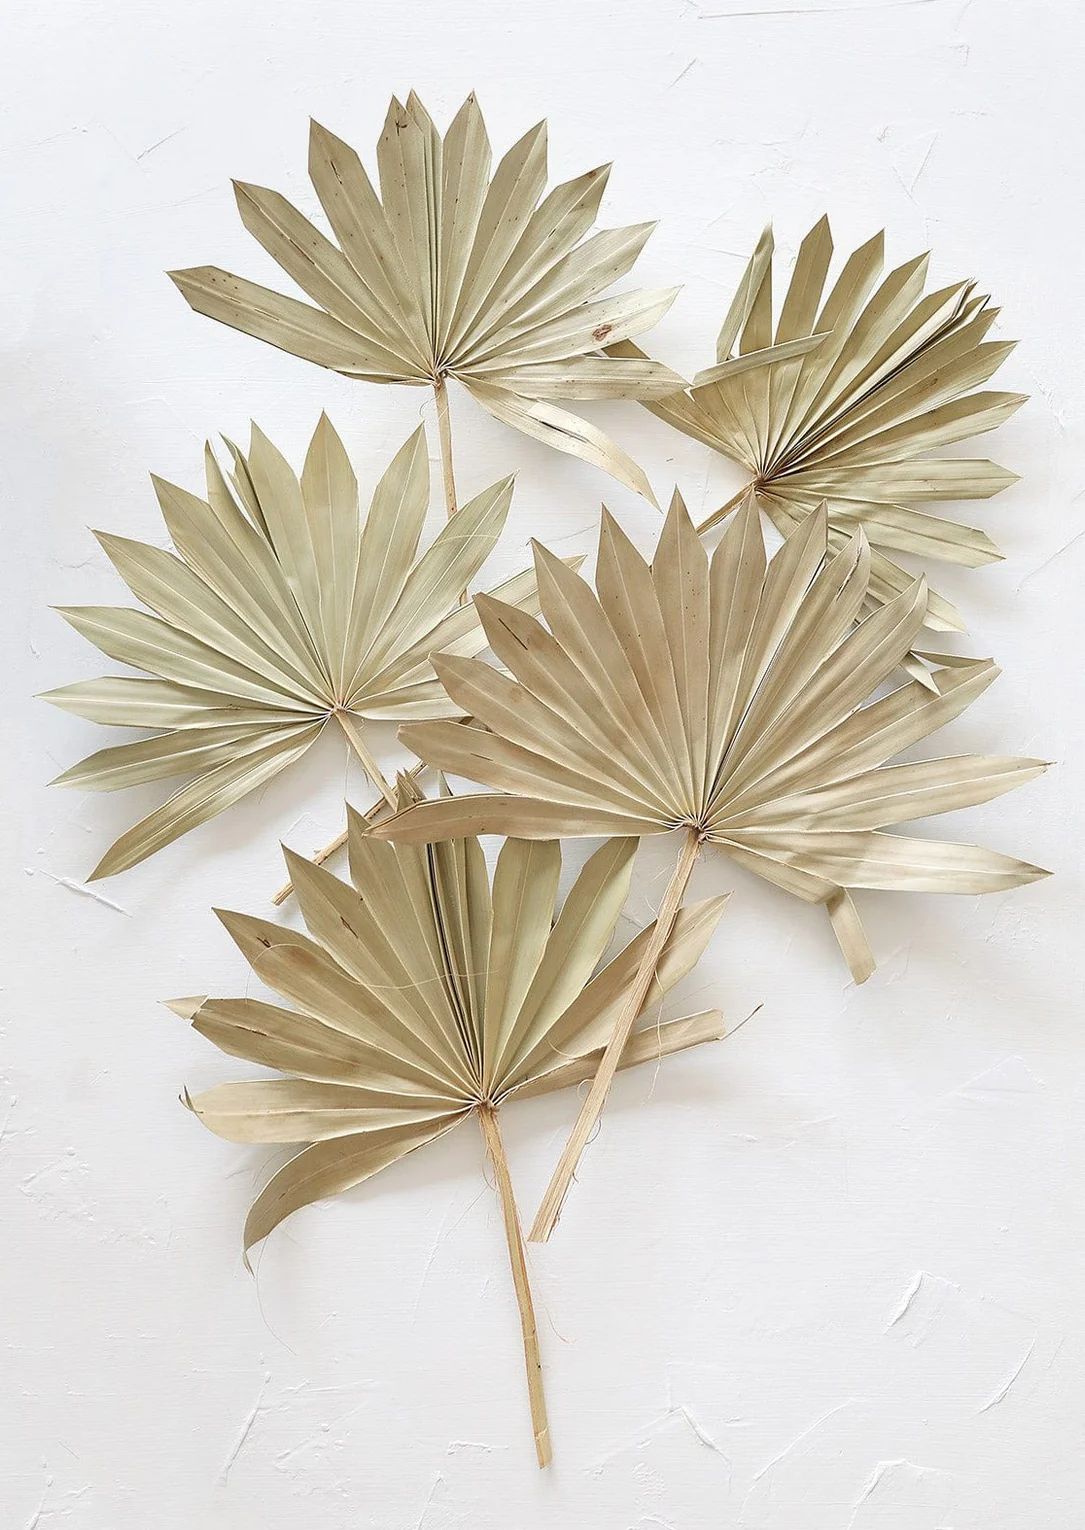 Pack of 5 - Natural Sun Palm Leaves | Afloral (US)